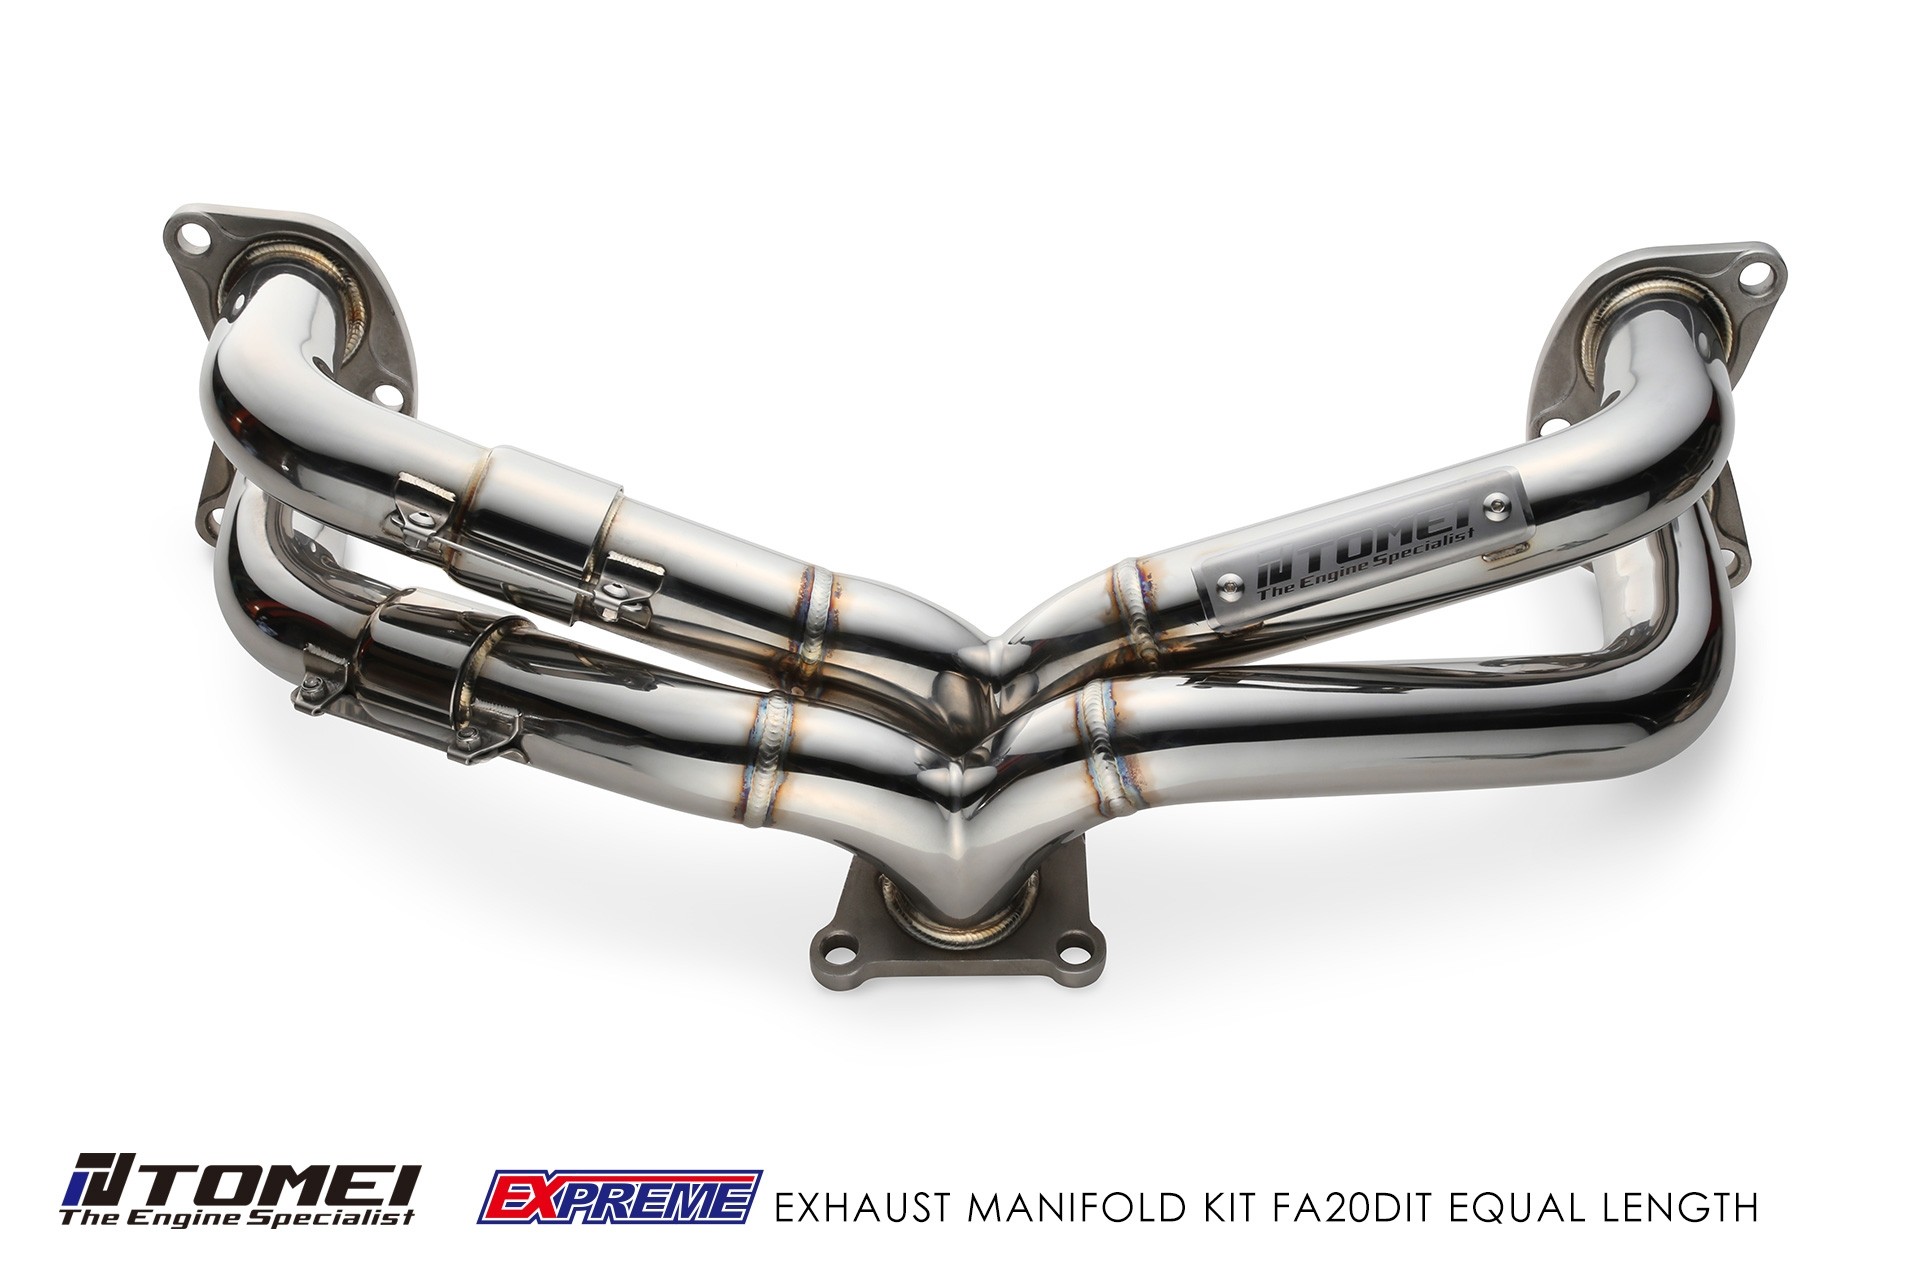 Tomei Expreme Equal Length Exhaust Manifold Kit - 2015+ WRX / 2014